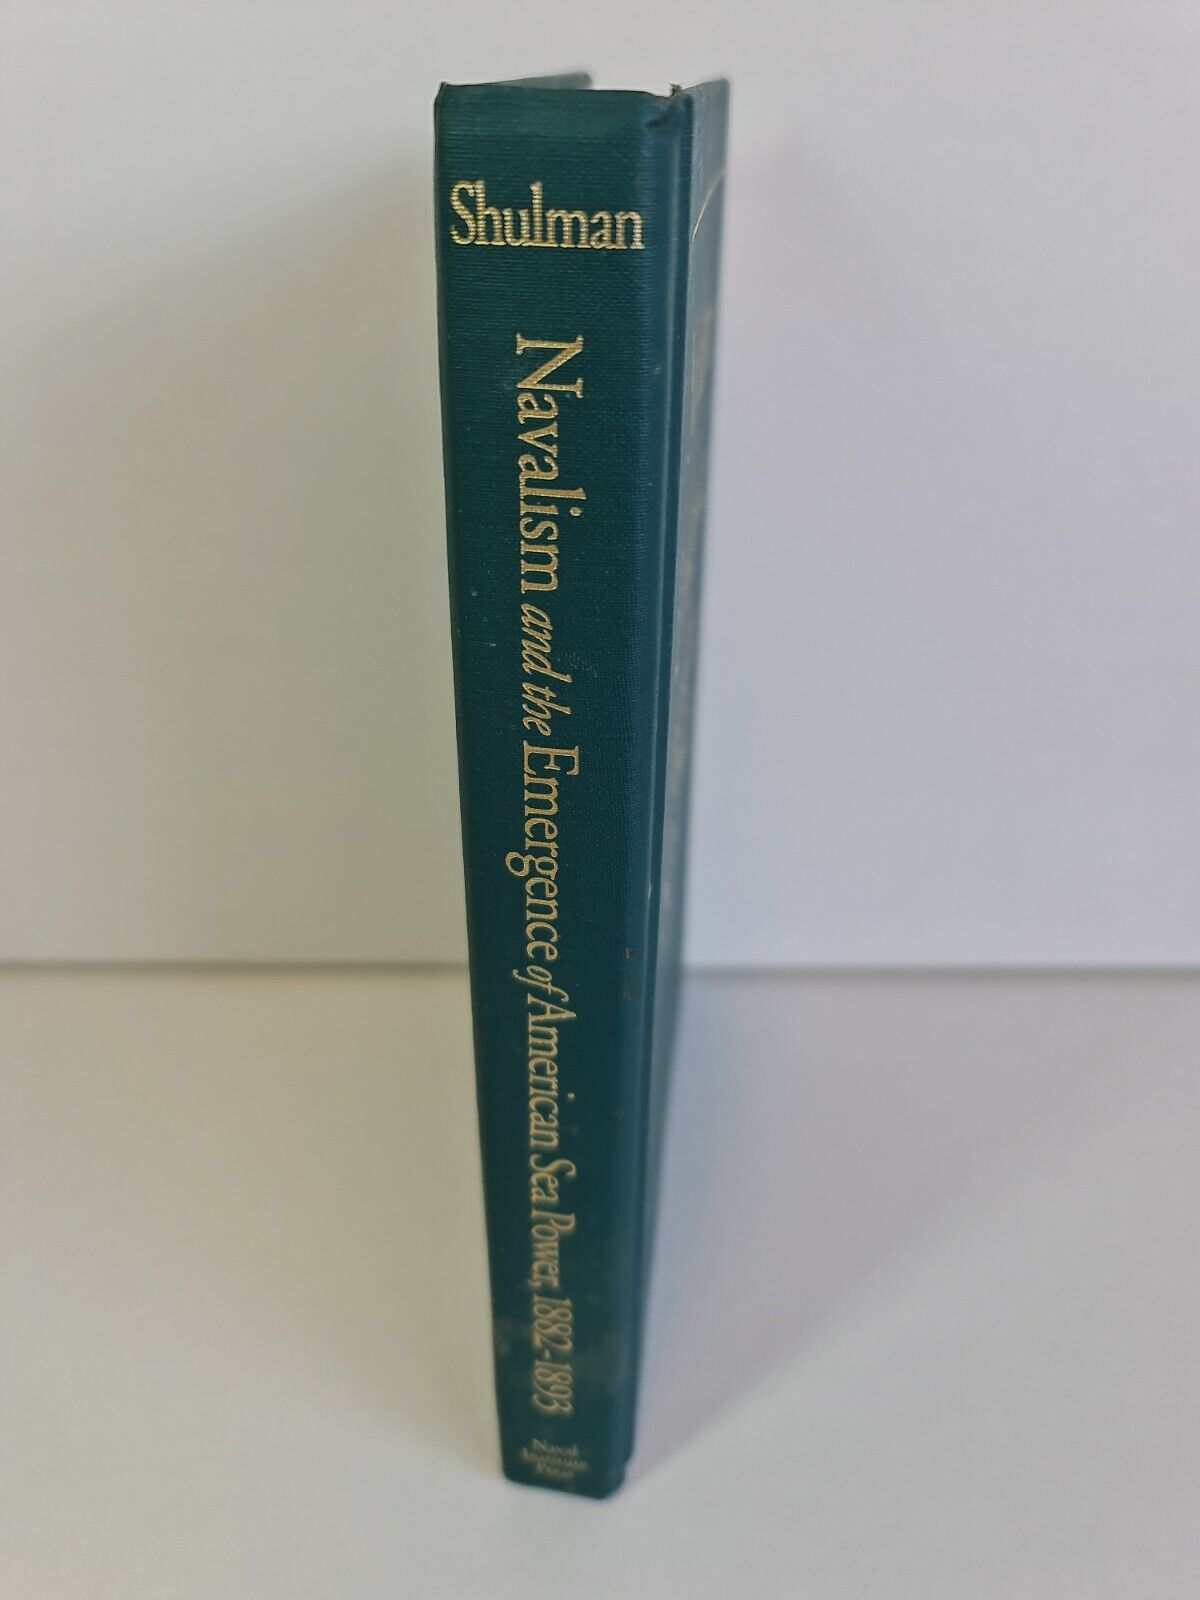 SIGNED Navalism & the Emergence of American Sea Power 1882-93 by Mark Shulman